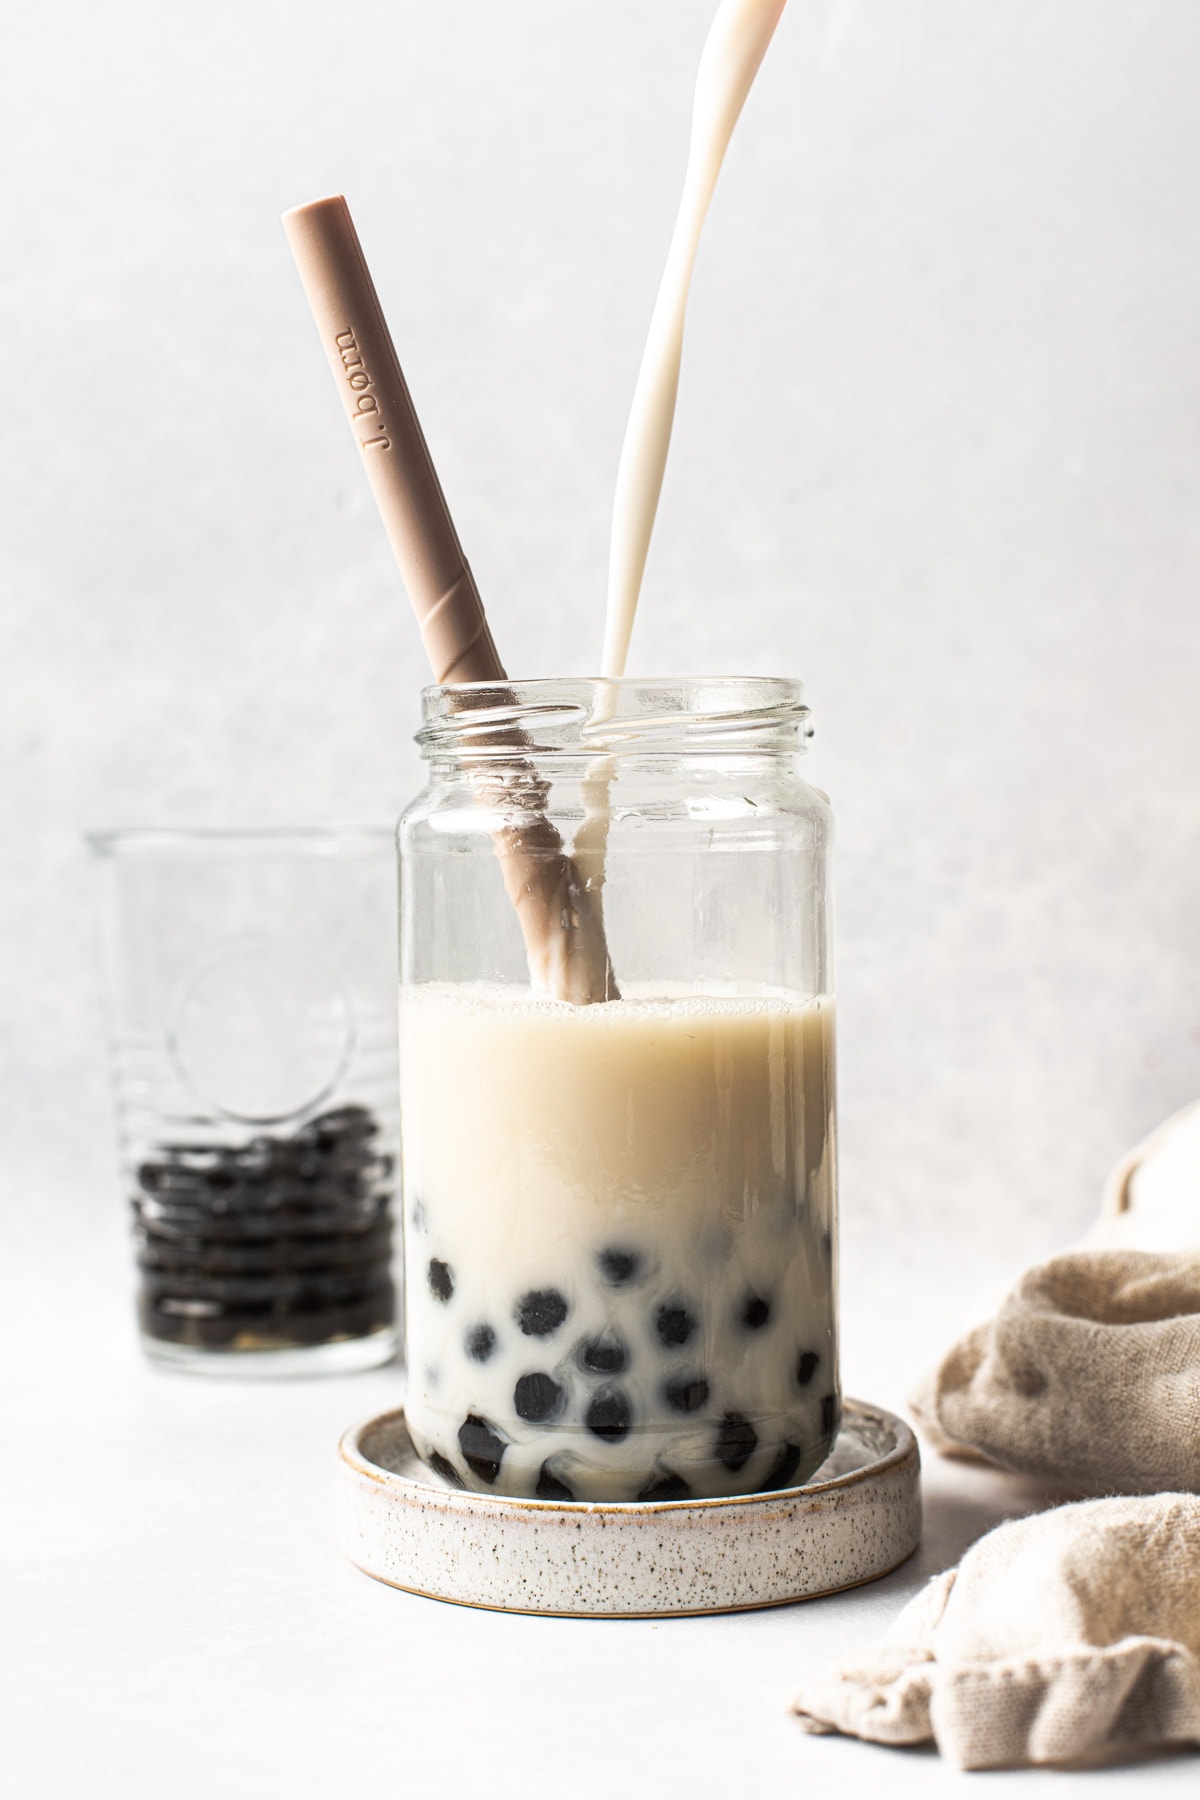 A side view of milk being poured into a glass containing black tapioca pearls.